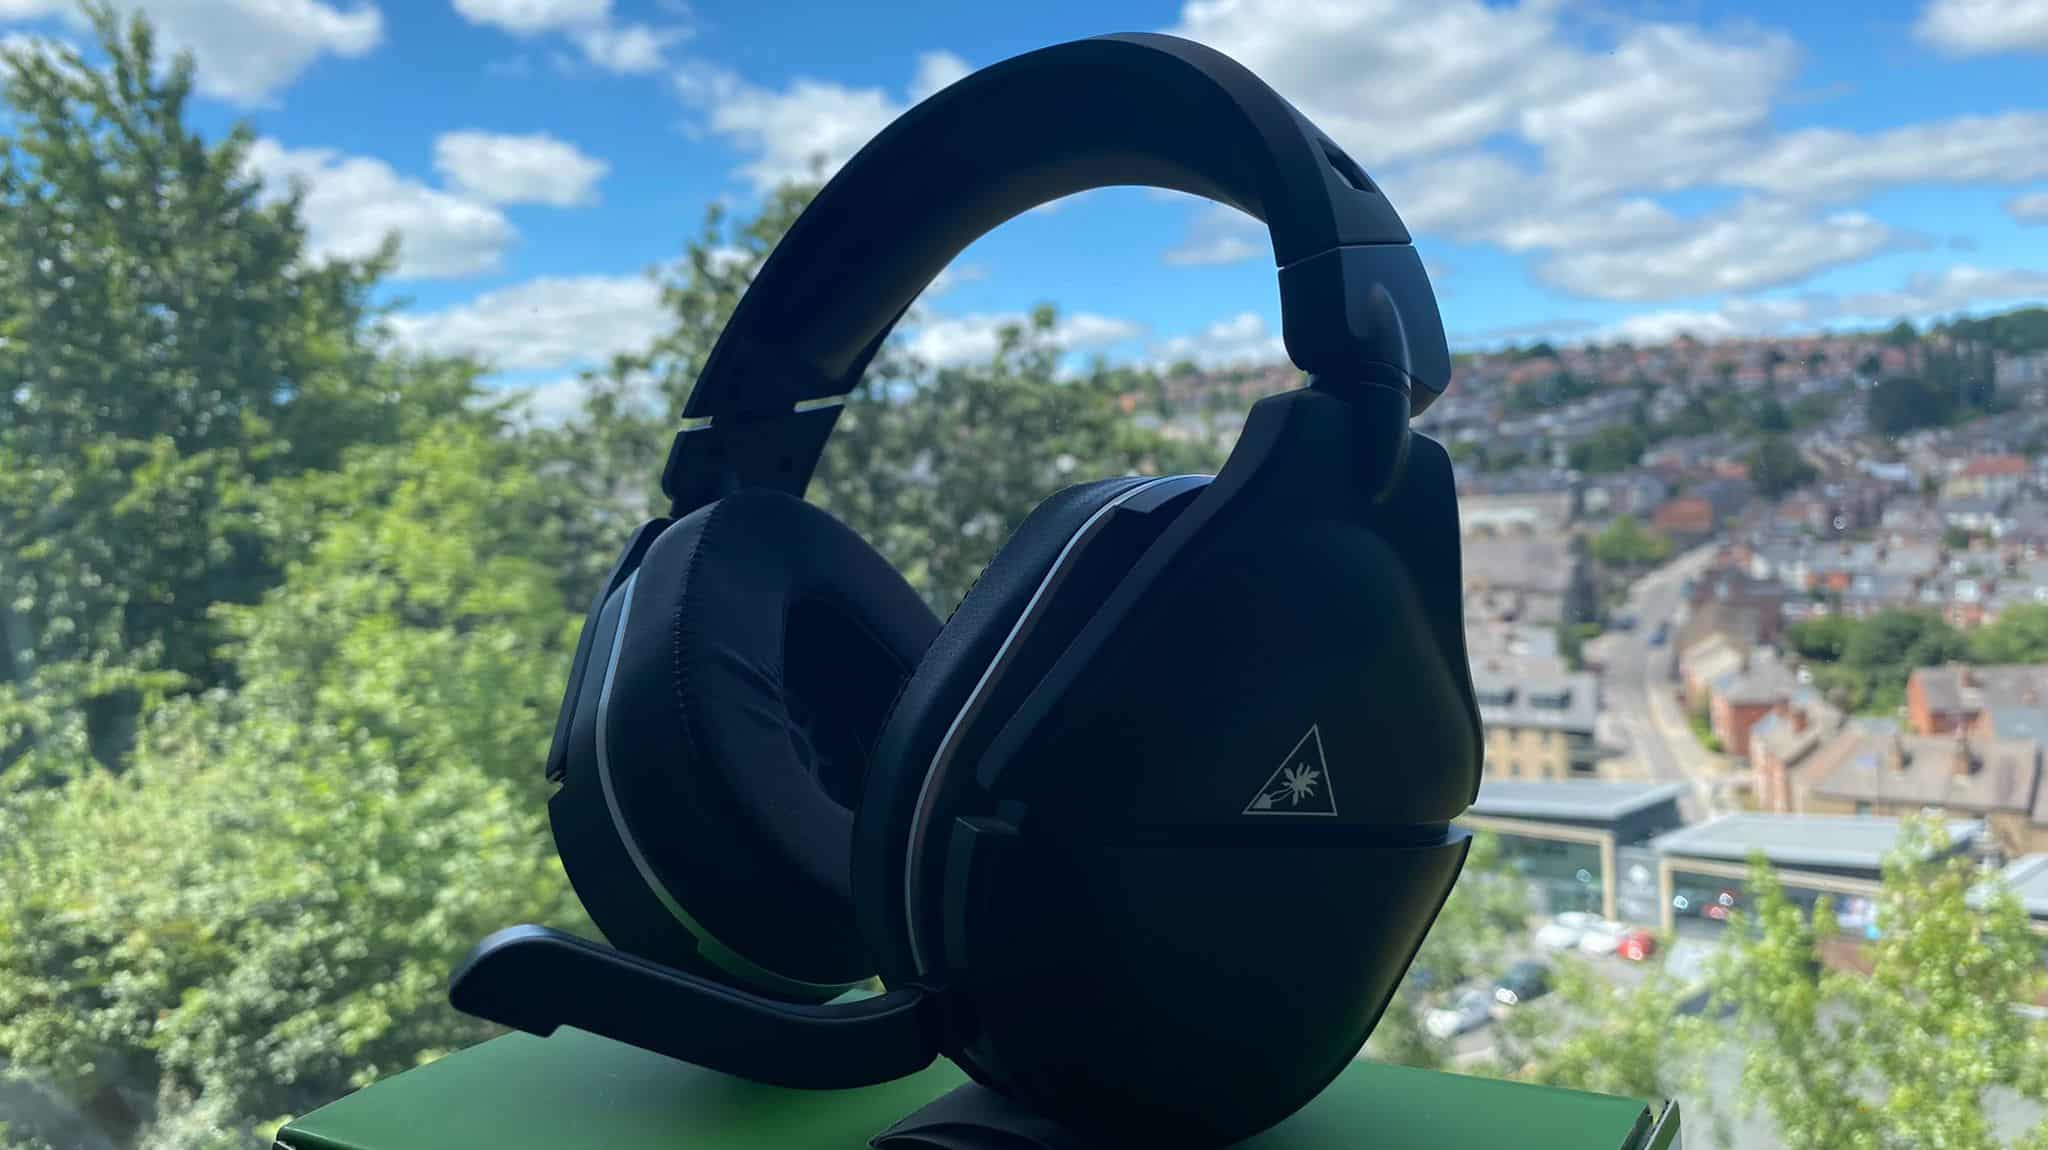 Turtle Beach Stealth 700 Gen 2 Max Review - IGN